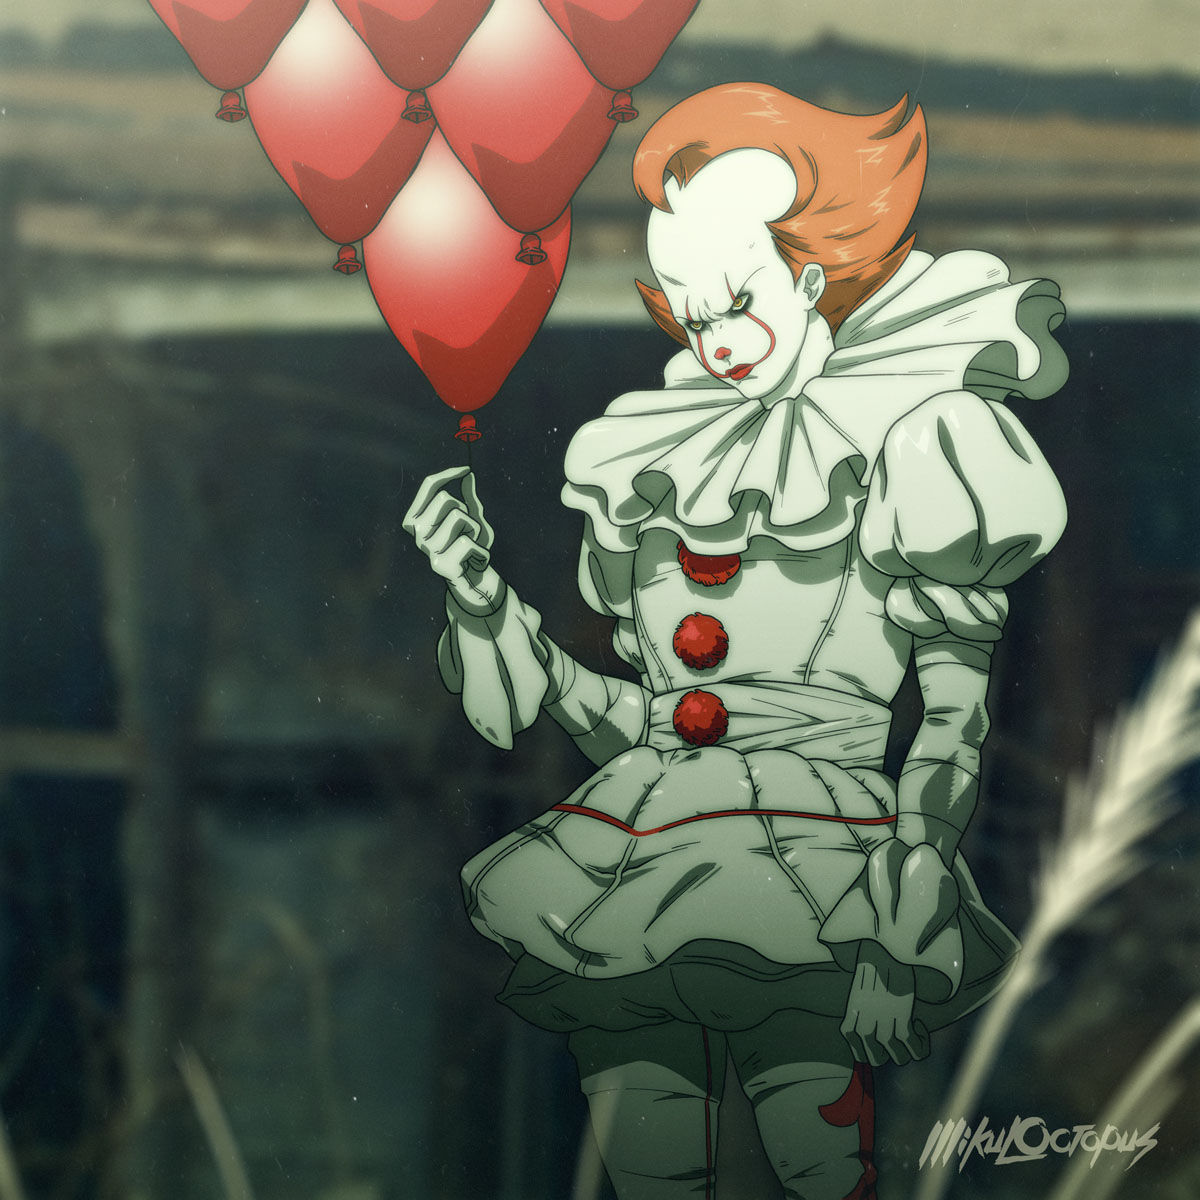 Mike Anderson-Mikuloctopus-Pennywise-01